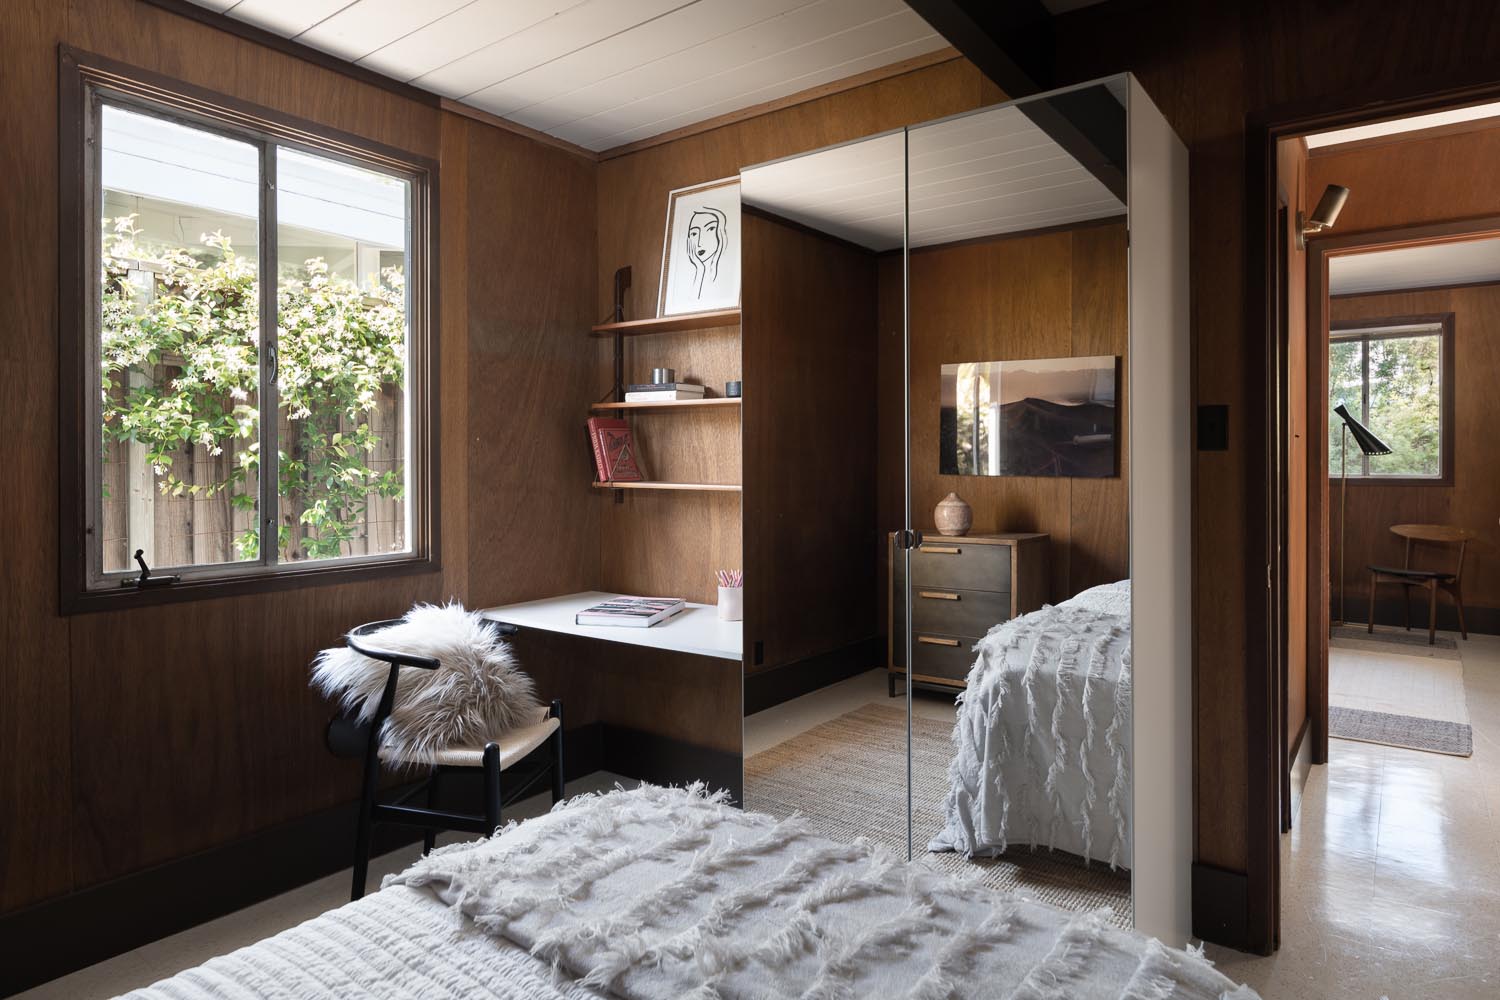 In this bedroom, a custom designed desk with floating shelving was included.